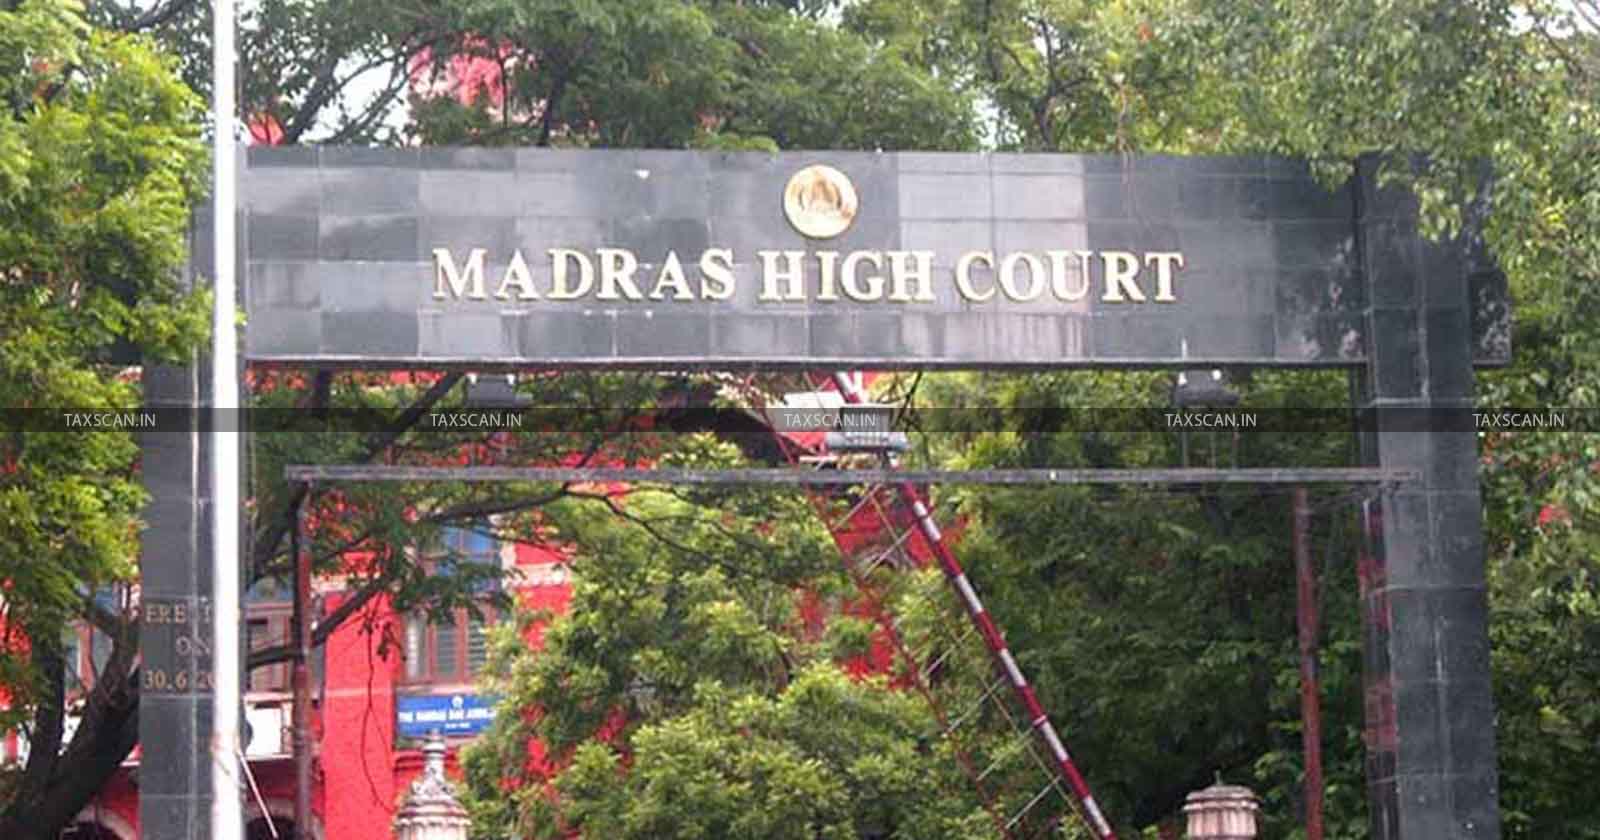 ssistant Commissioner - Madras High Court - Issuance of DRC - TAXSCAN